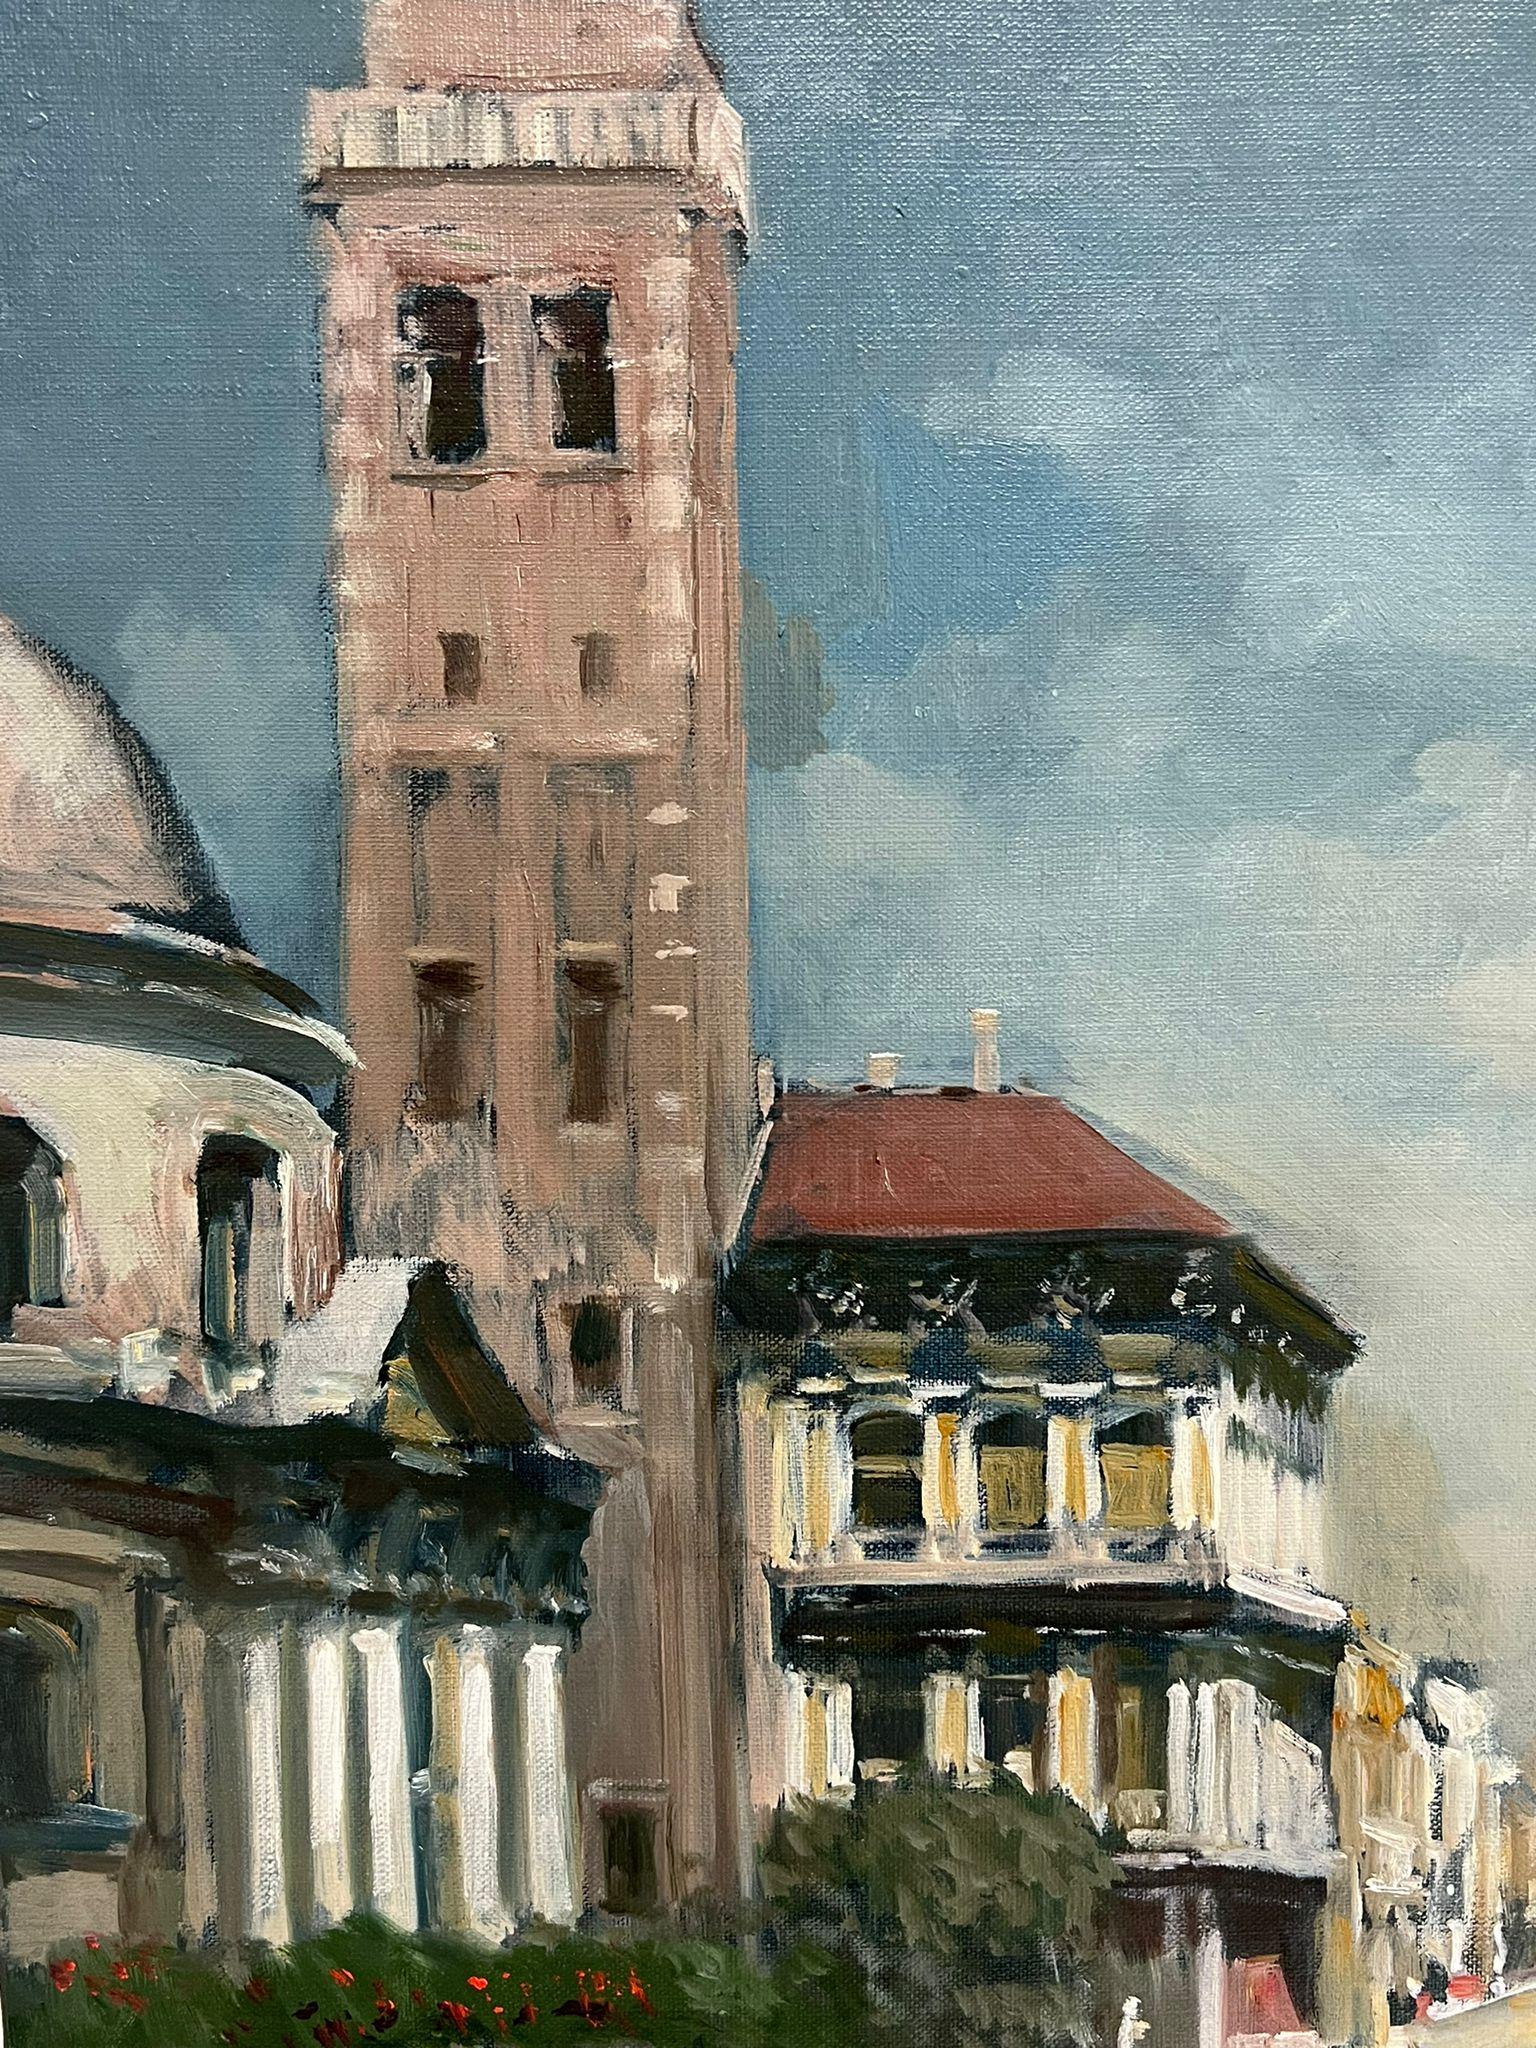 Venice
Russian School, indistinctly signed front and back
oil painting on canvas, unframed
canvas: 24 x 20 inches
provenance: private collection, UK
condition: very good and sound condition